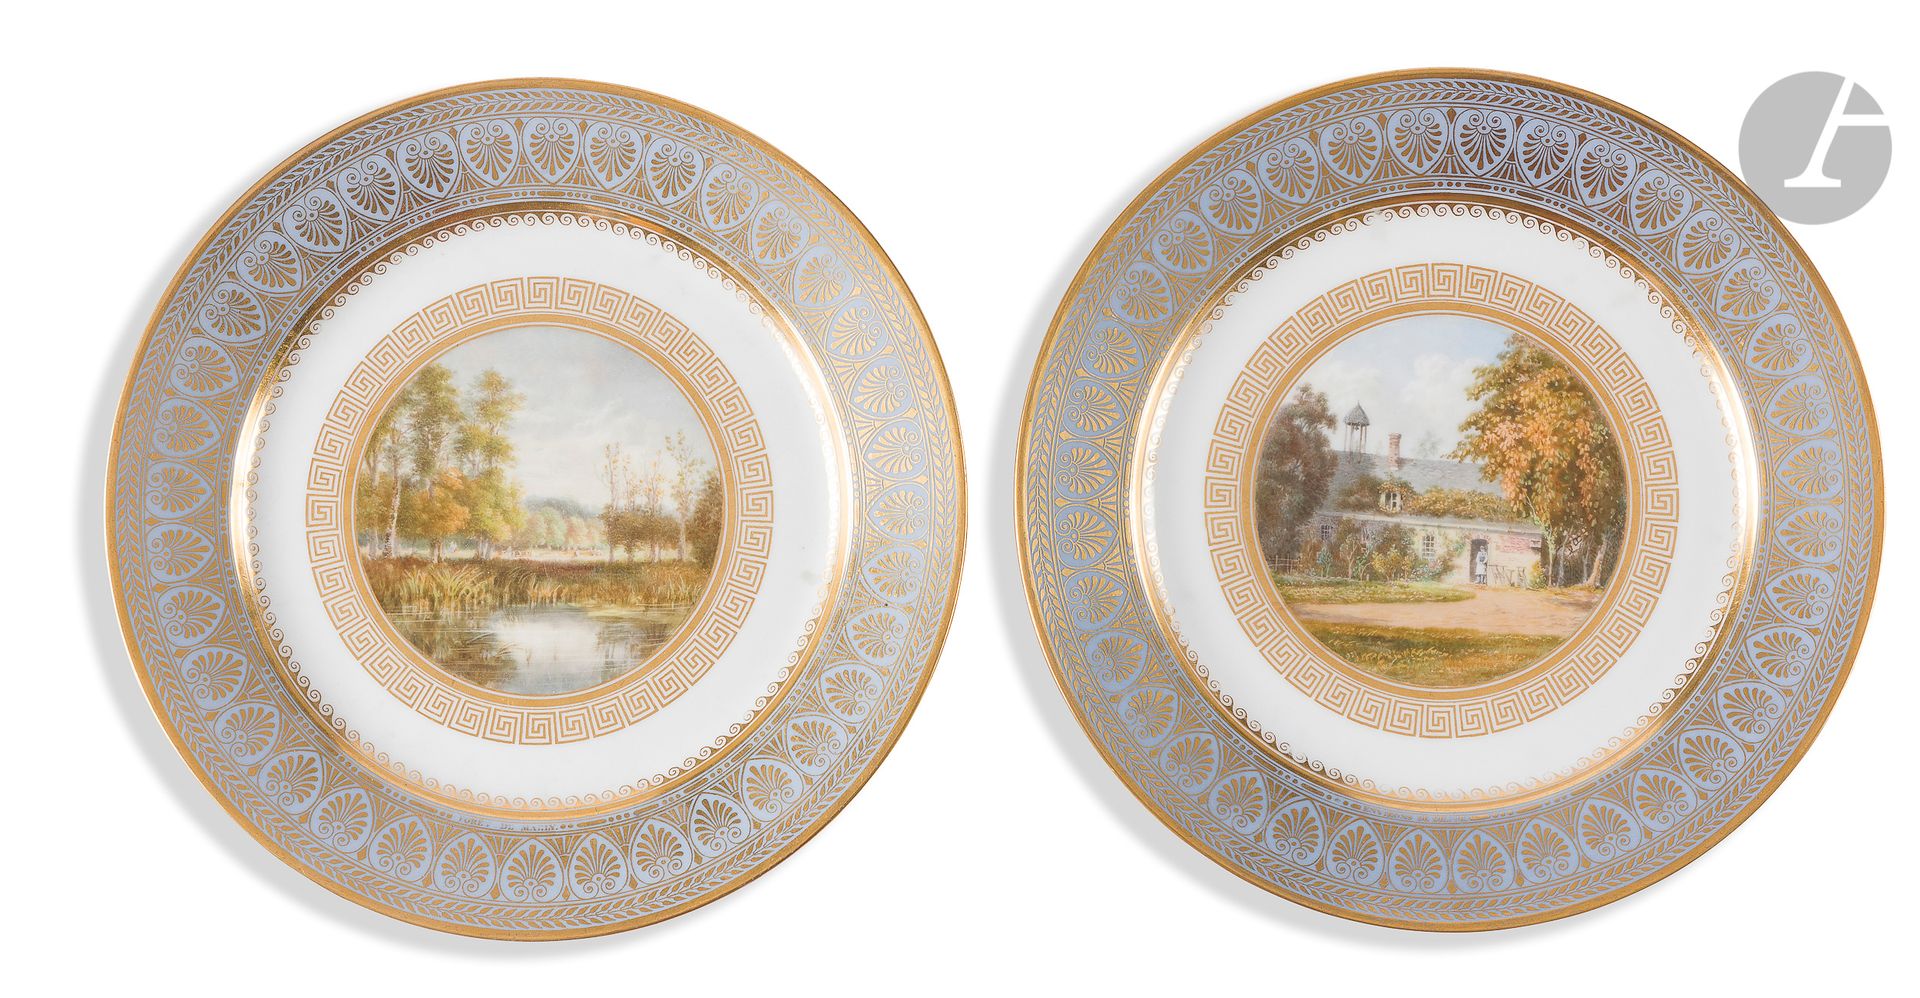 Null SèvresTwo
porcelain plates of the service of the Small views of France with&hellip;